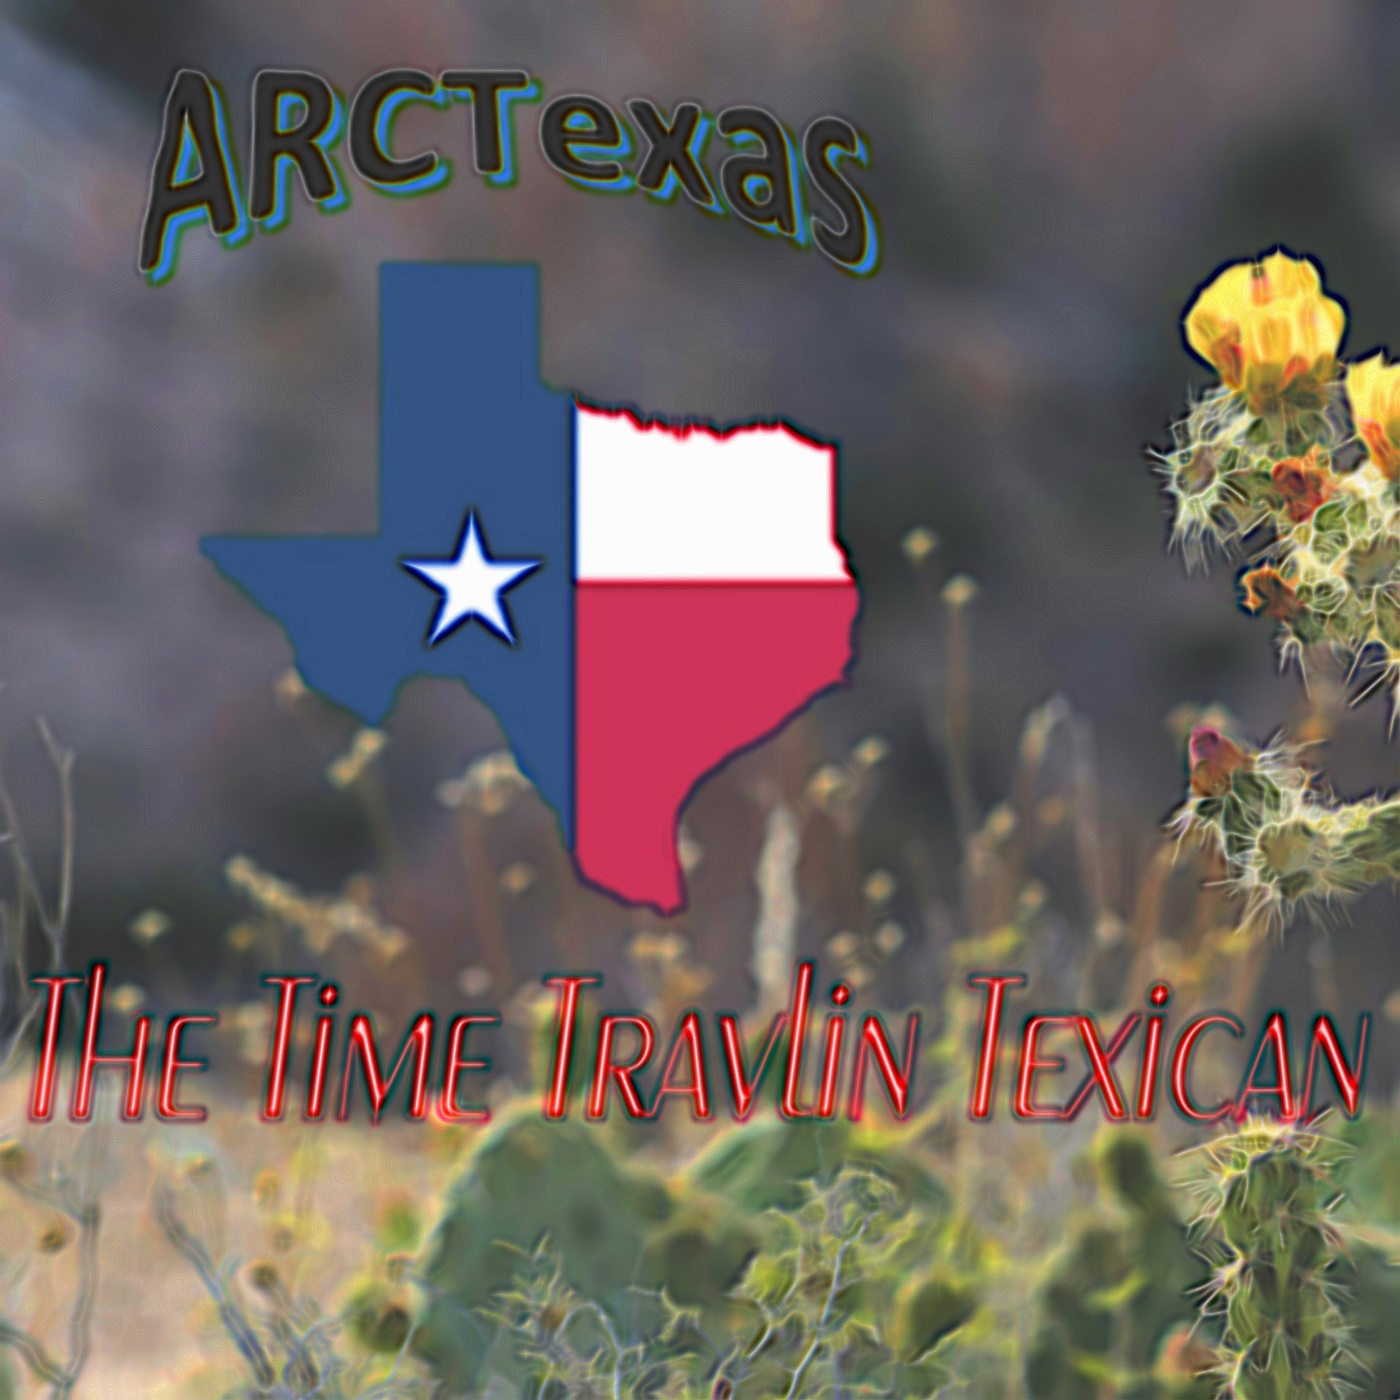 The Time Travelin Texican